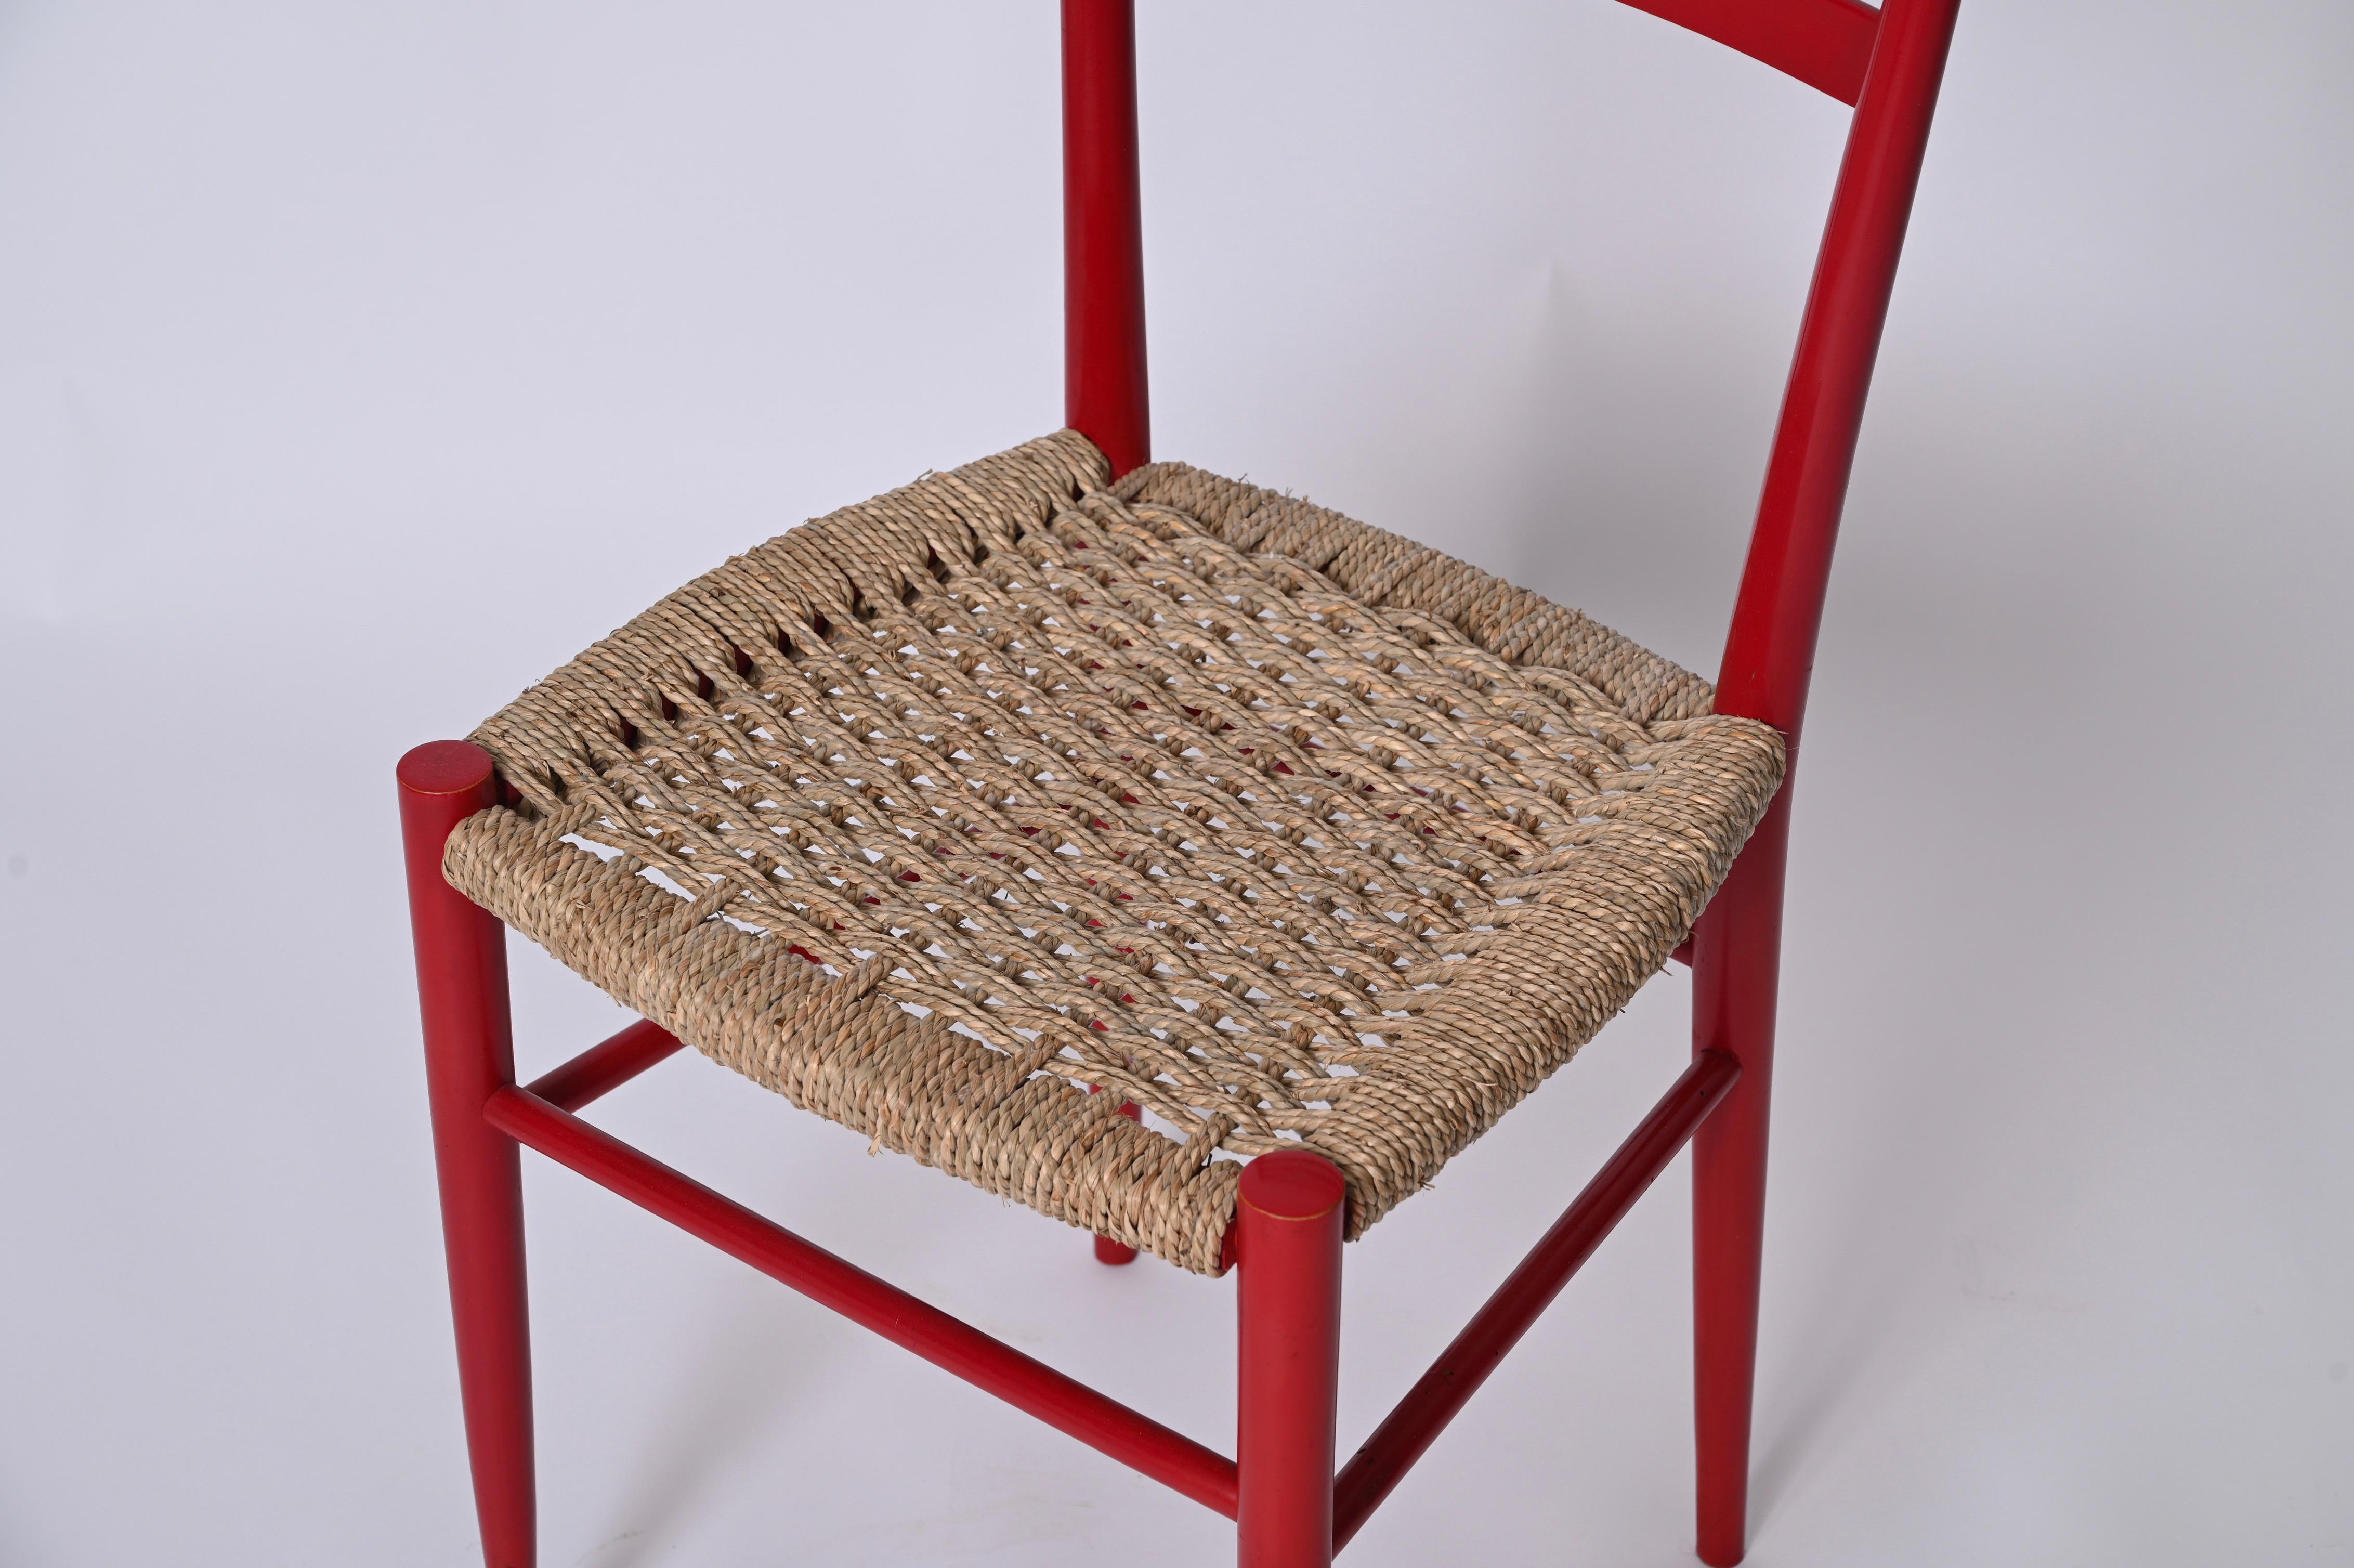 Set of 4 Chiavarine Chairs in Red Stained Beech and Bamboo Rope, Italy 1950s For Sale 3